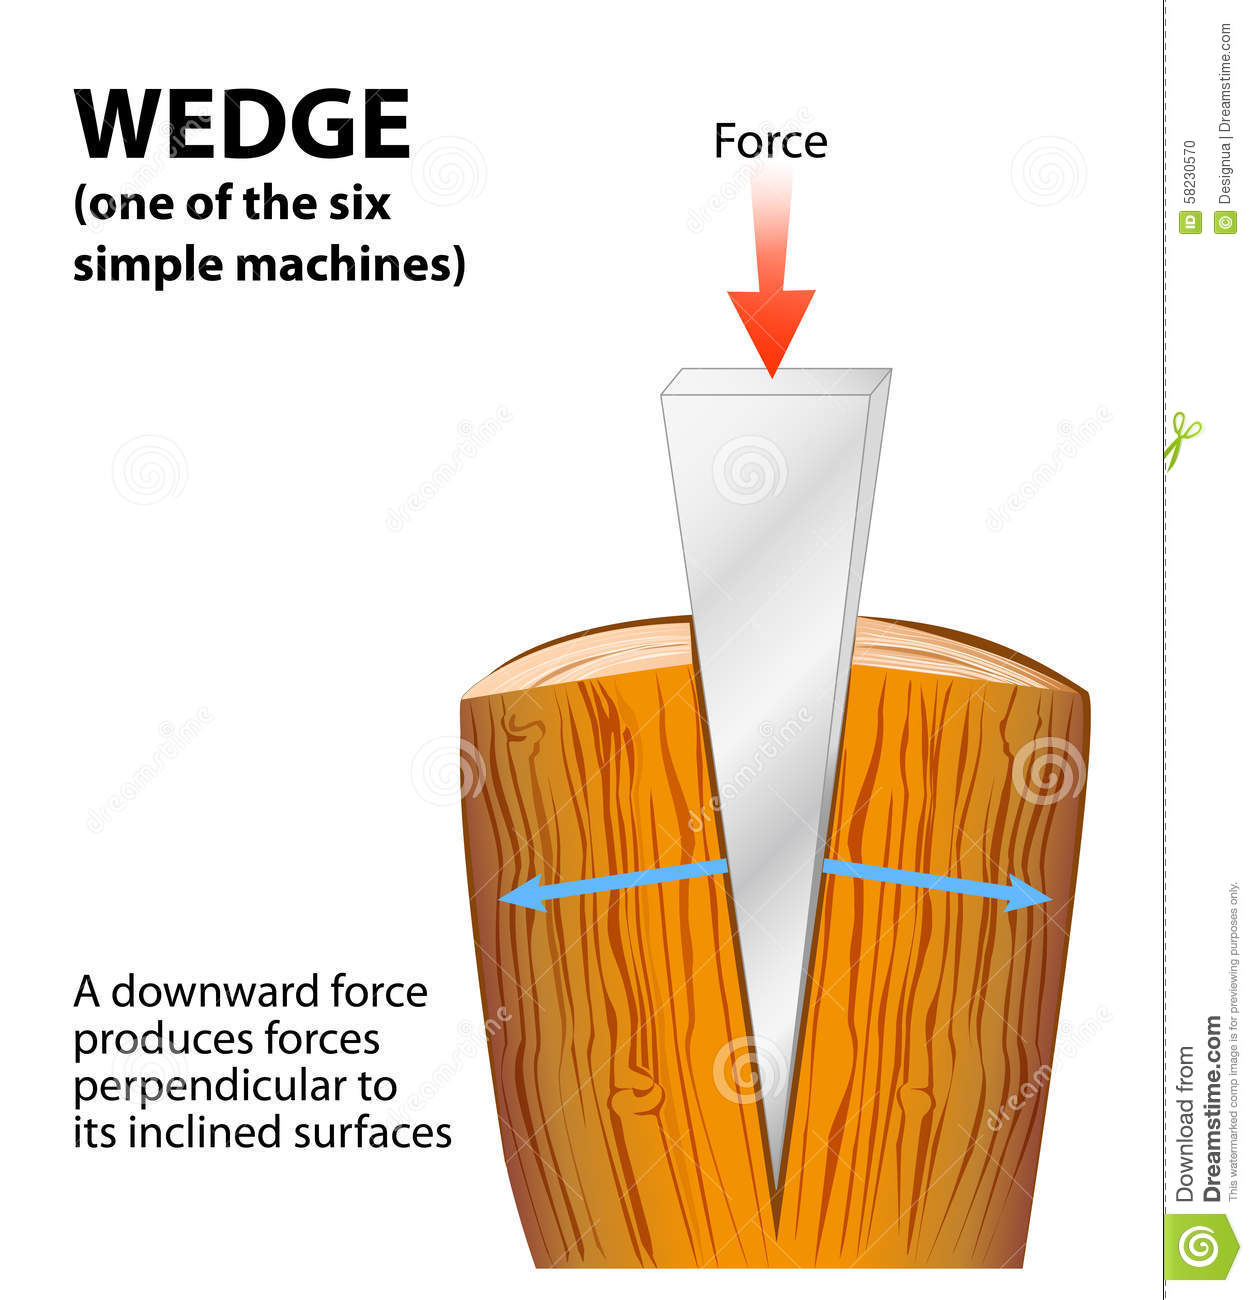 Albums 97+ Images pictures of wedge simple machine Stunning